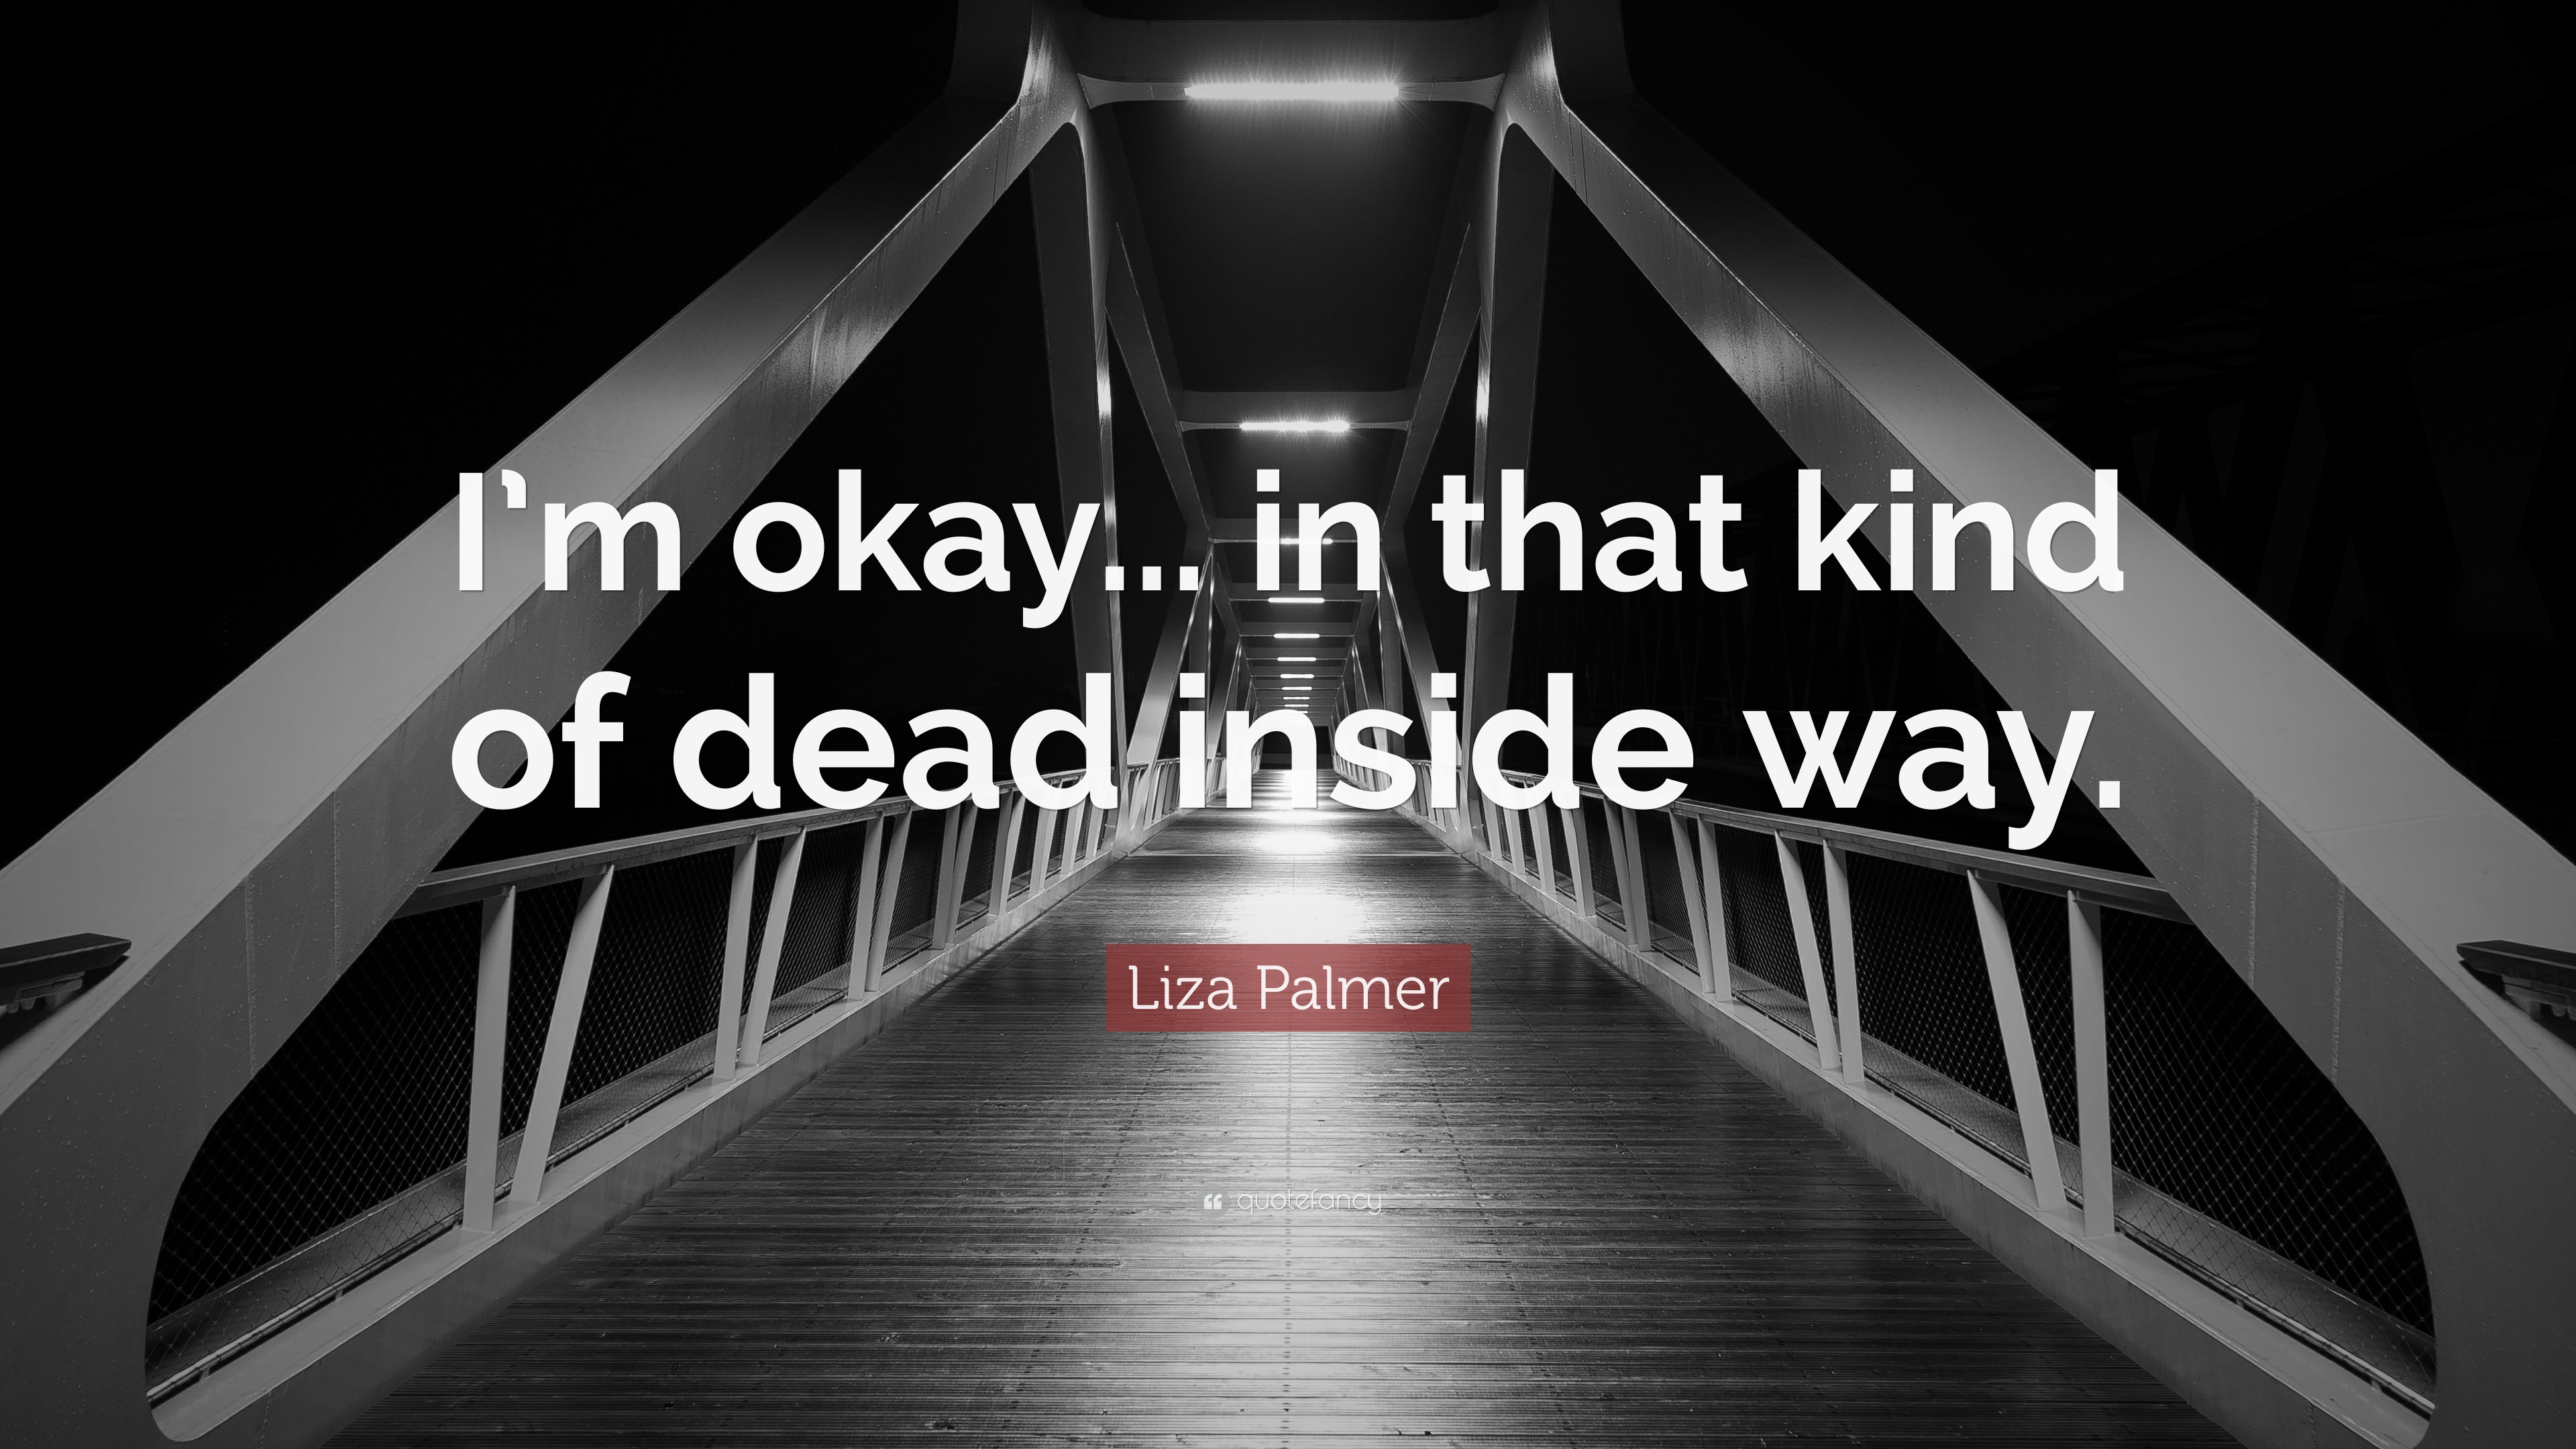 Liza Palmer Quote: “I'm okay... in that kind of dead inside way.”